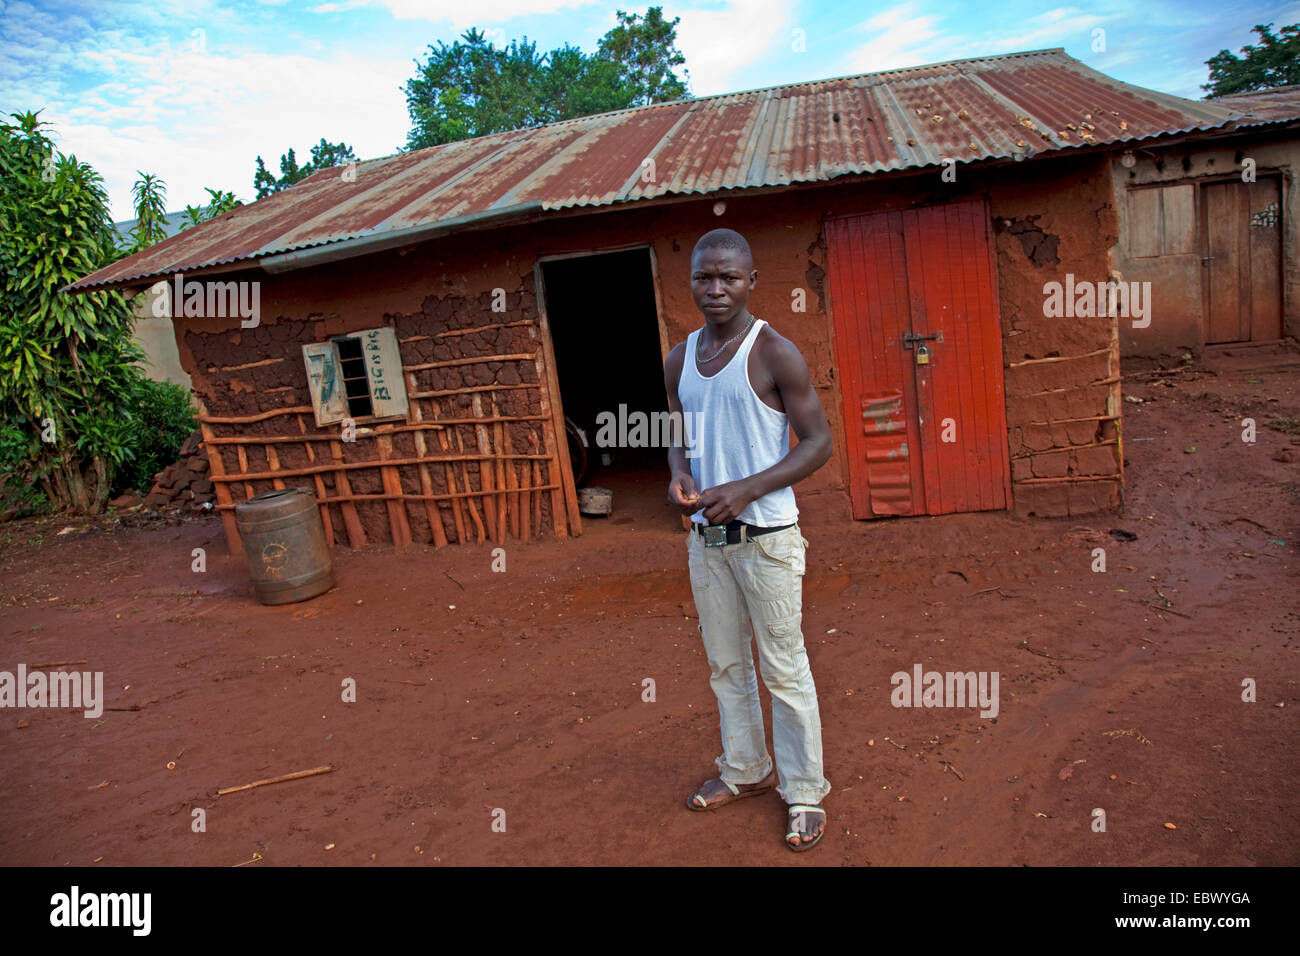 young man is standing on front of his simple mud house with a corrugated iron roof, Uganda, Jinja Stock Photo